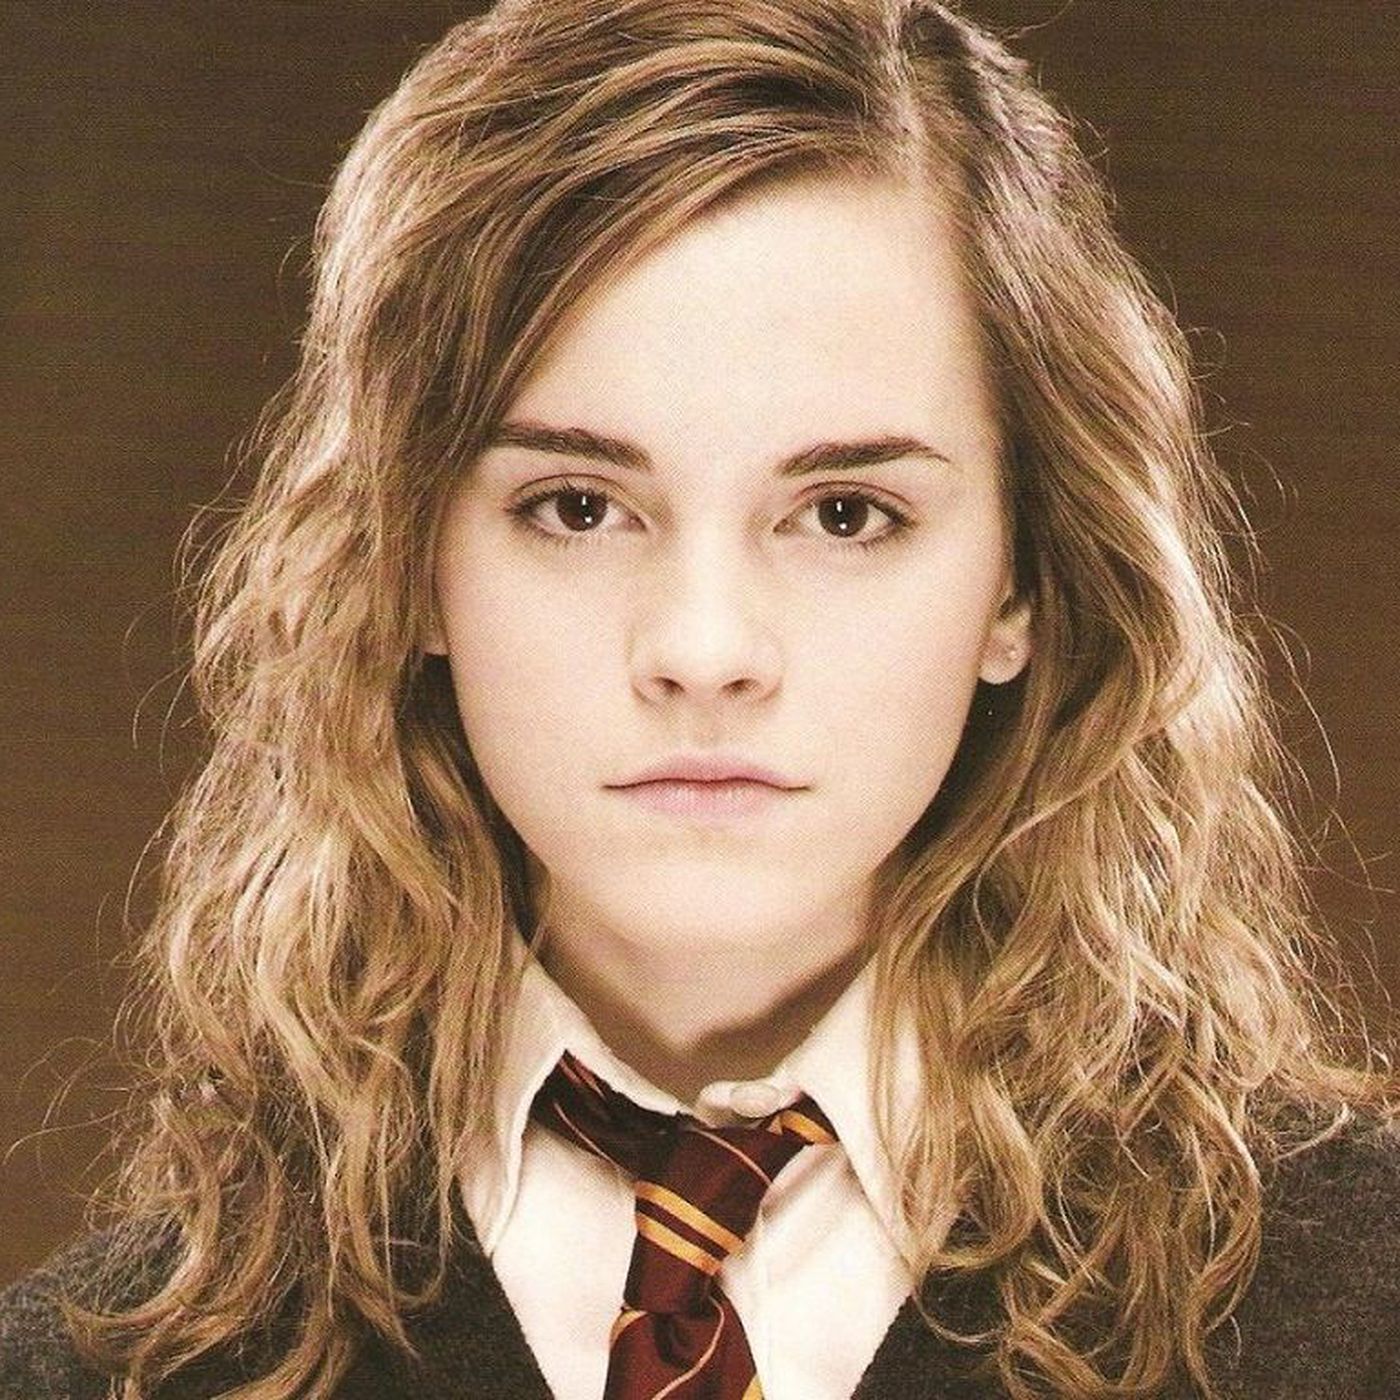 Emma Watson: From Bookworm to Beacon of Change